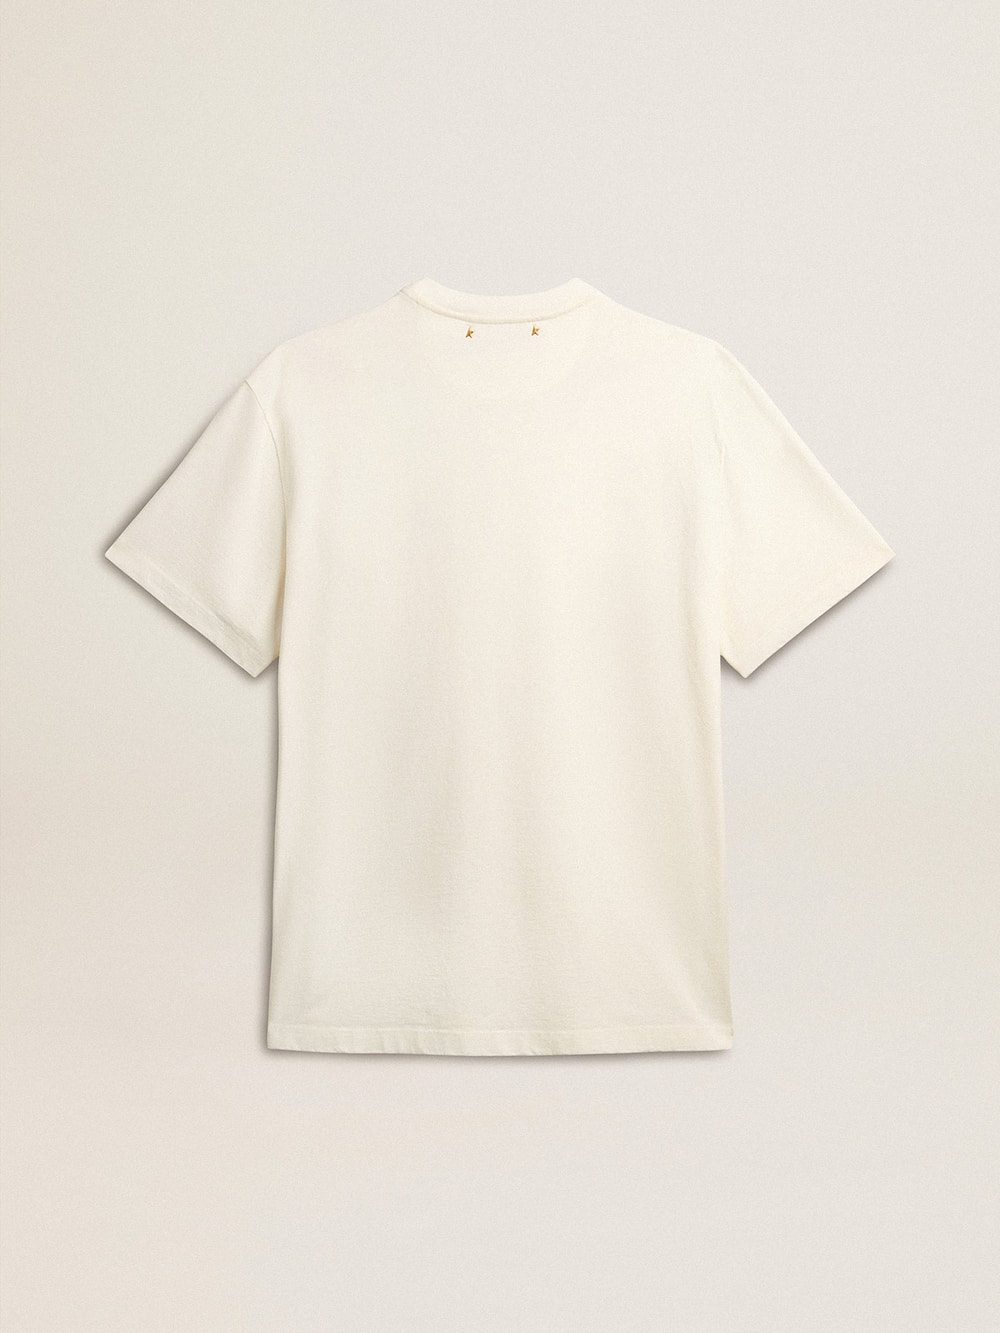 Golden Goose - White cotton T-shirt with seasonal logo print on the front in 